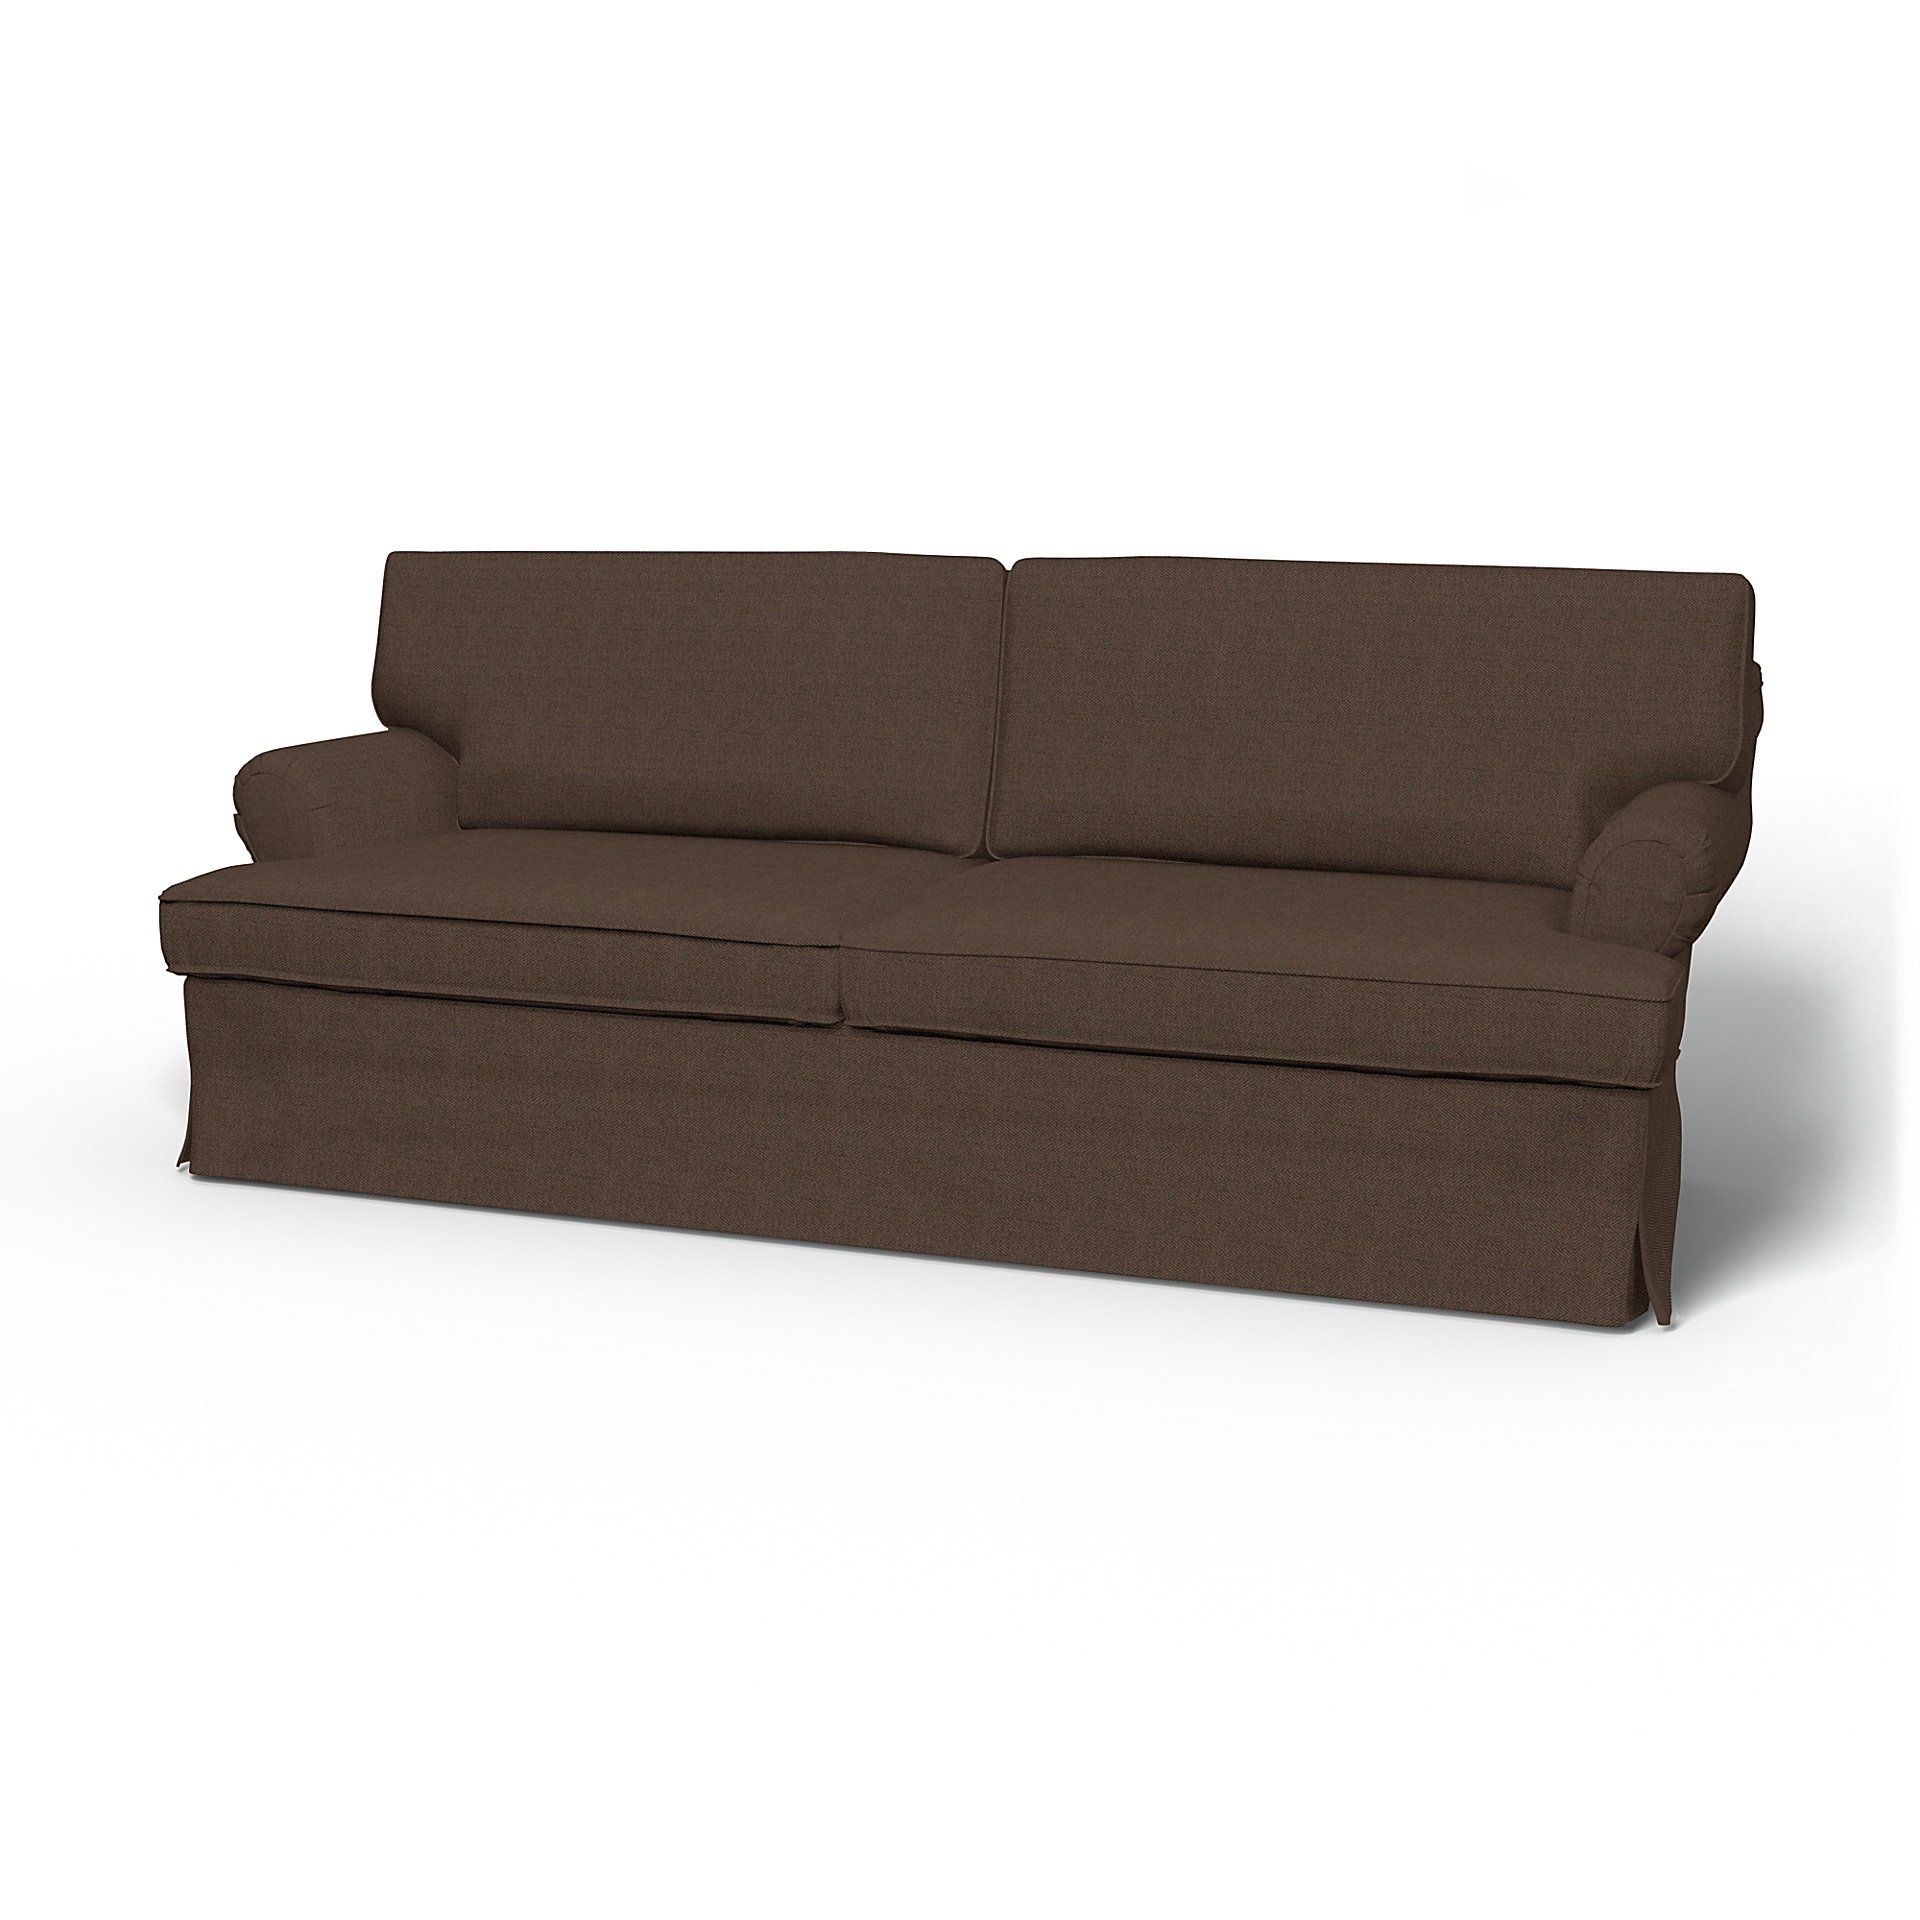 IKEA - Stockholm 3 Seater Sofa Cover (1994-2000), Chocolate, Boucle & Texture - Bemz